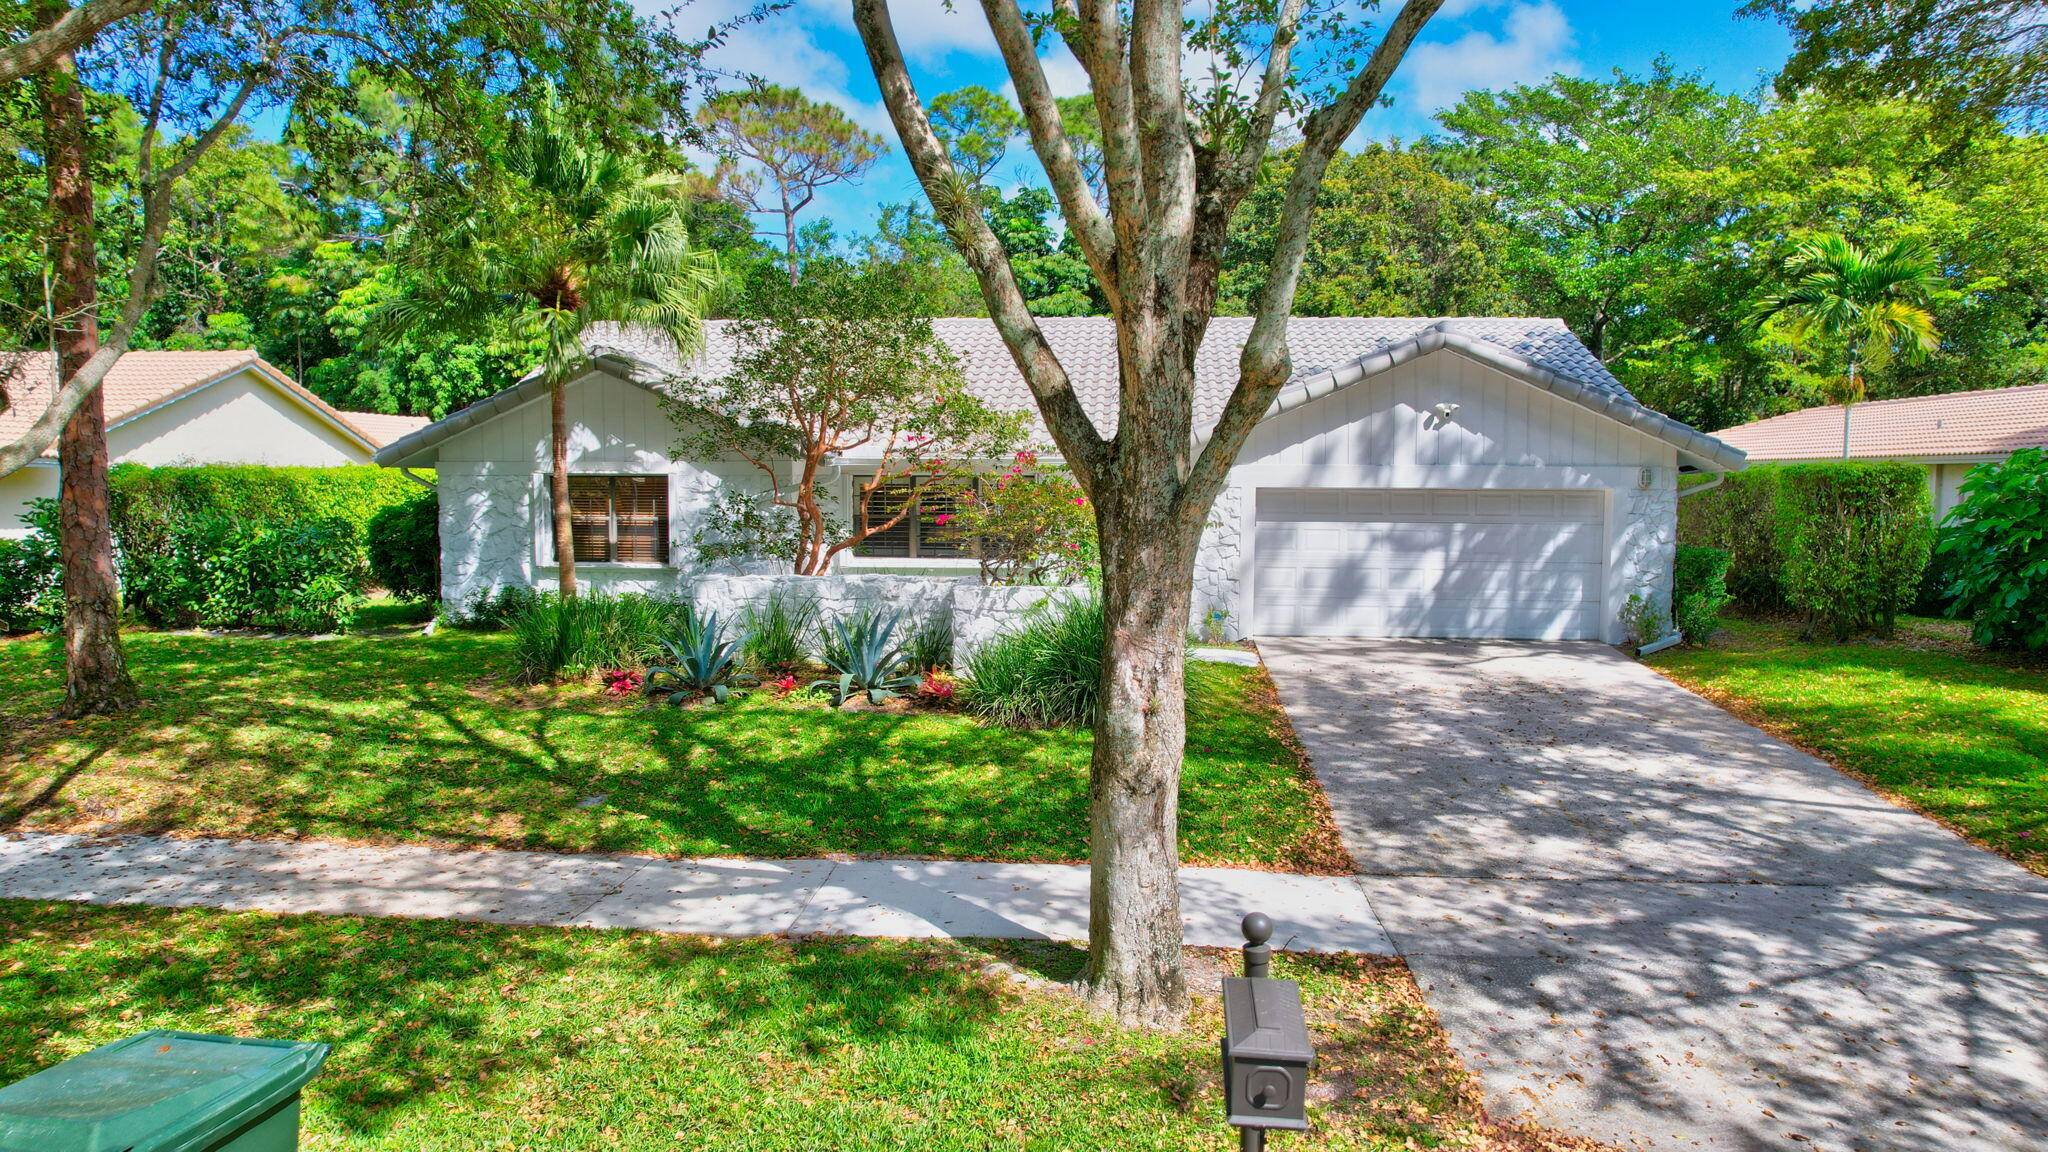 Amazing Opportunity To Make This Contemporary 3 Bedroom 2 Bath Pool Home Your Dream House.